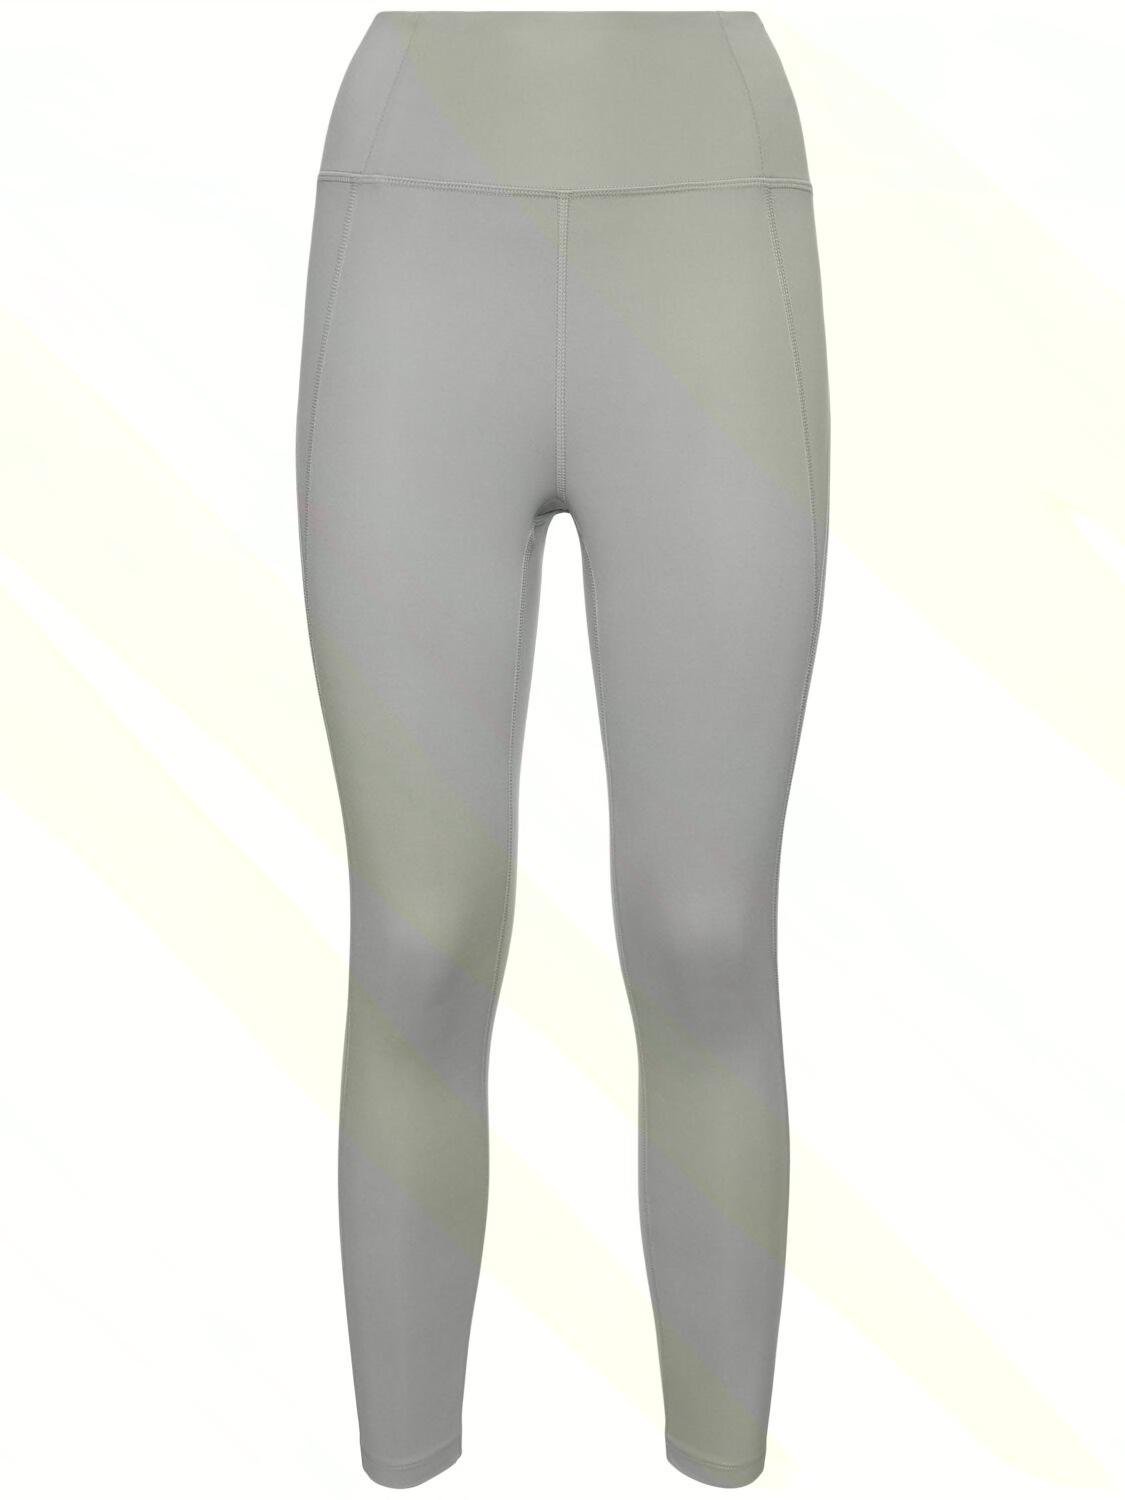 High Waist 7/8 Compressive Leggings by GIRLFRIEND COLLECTIVE